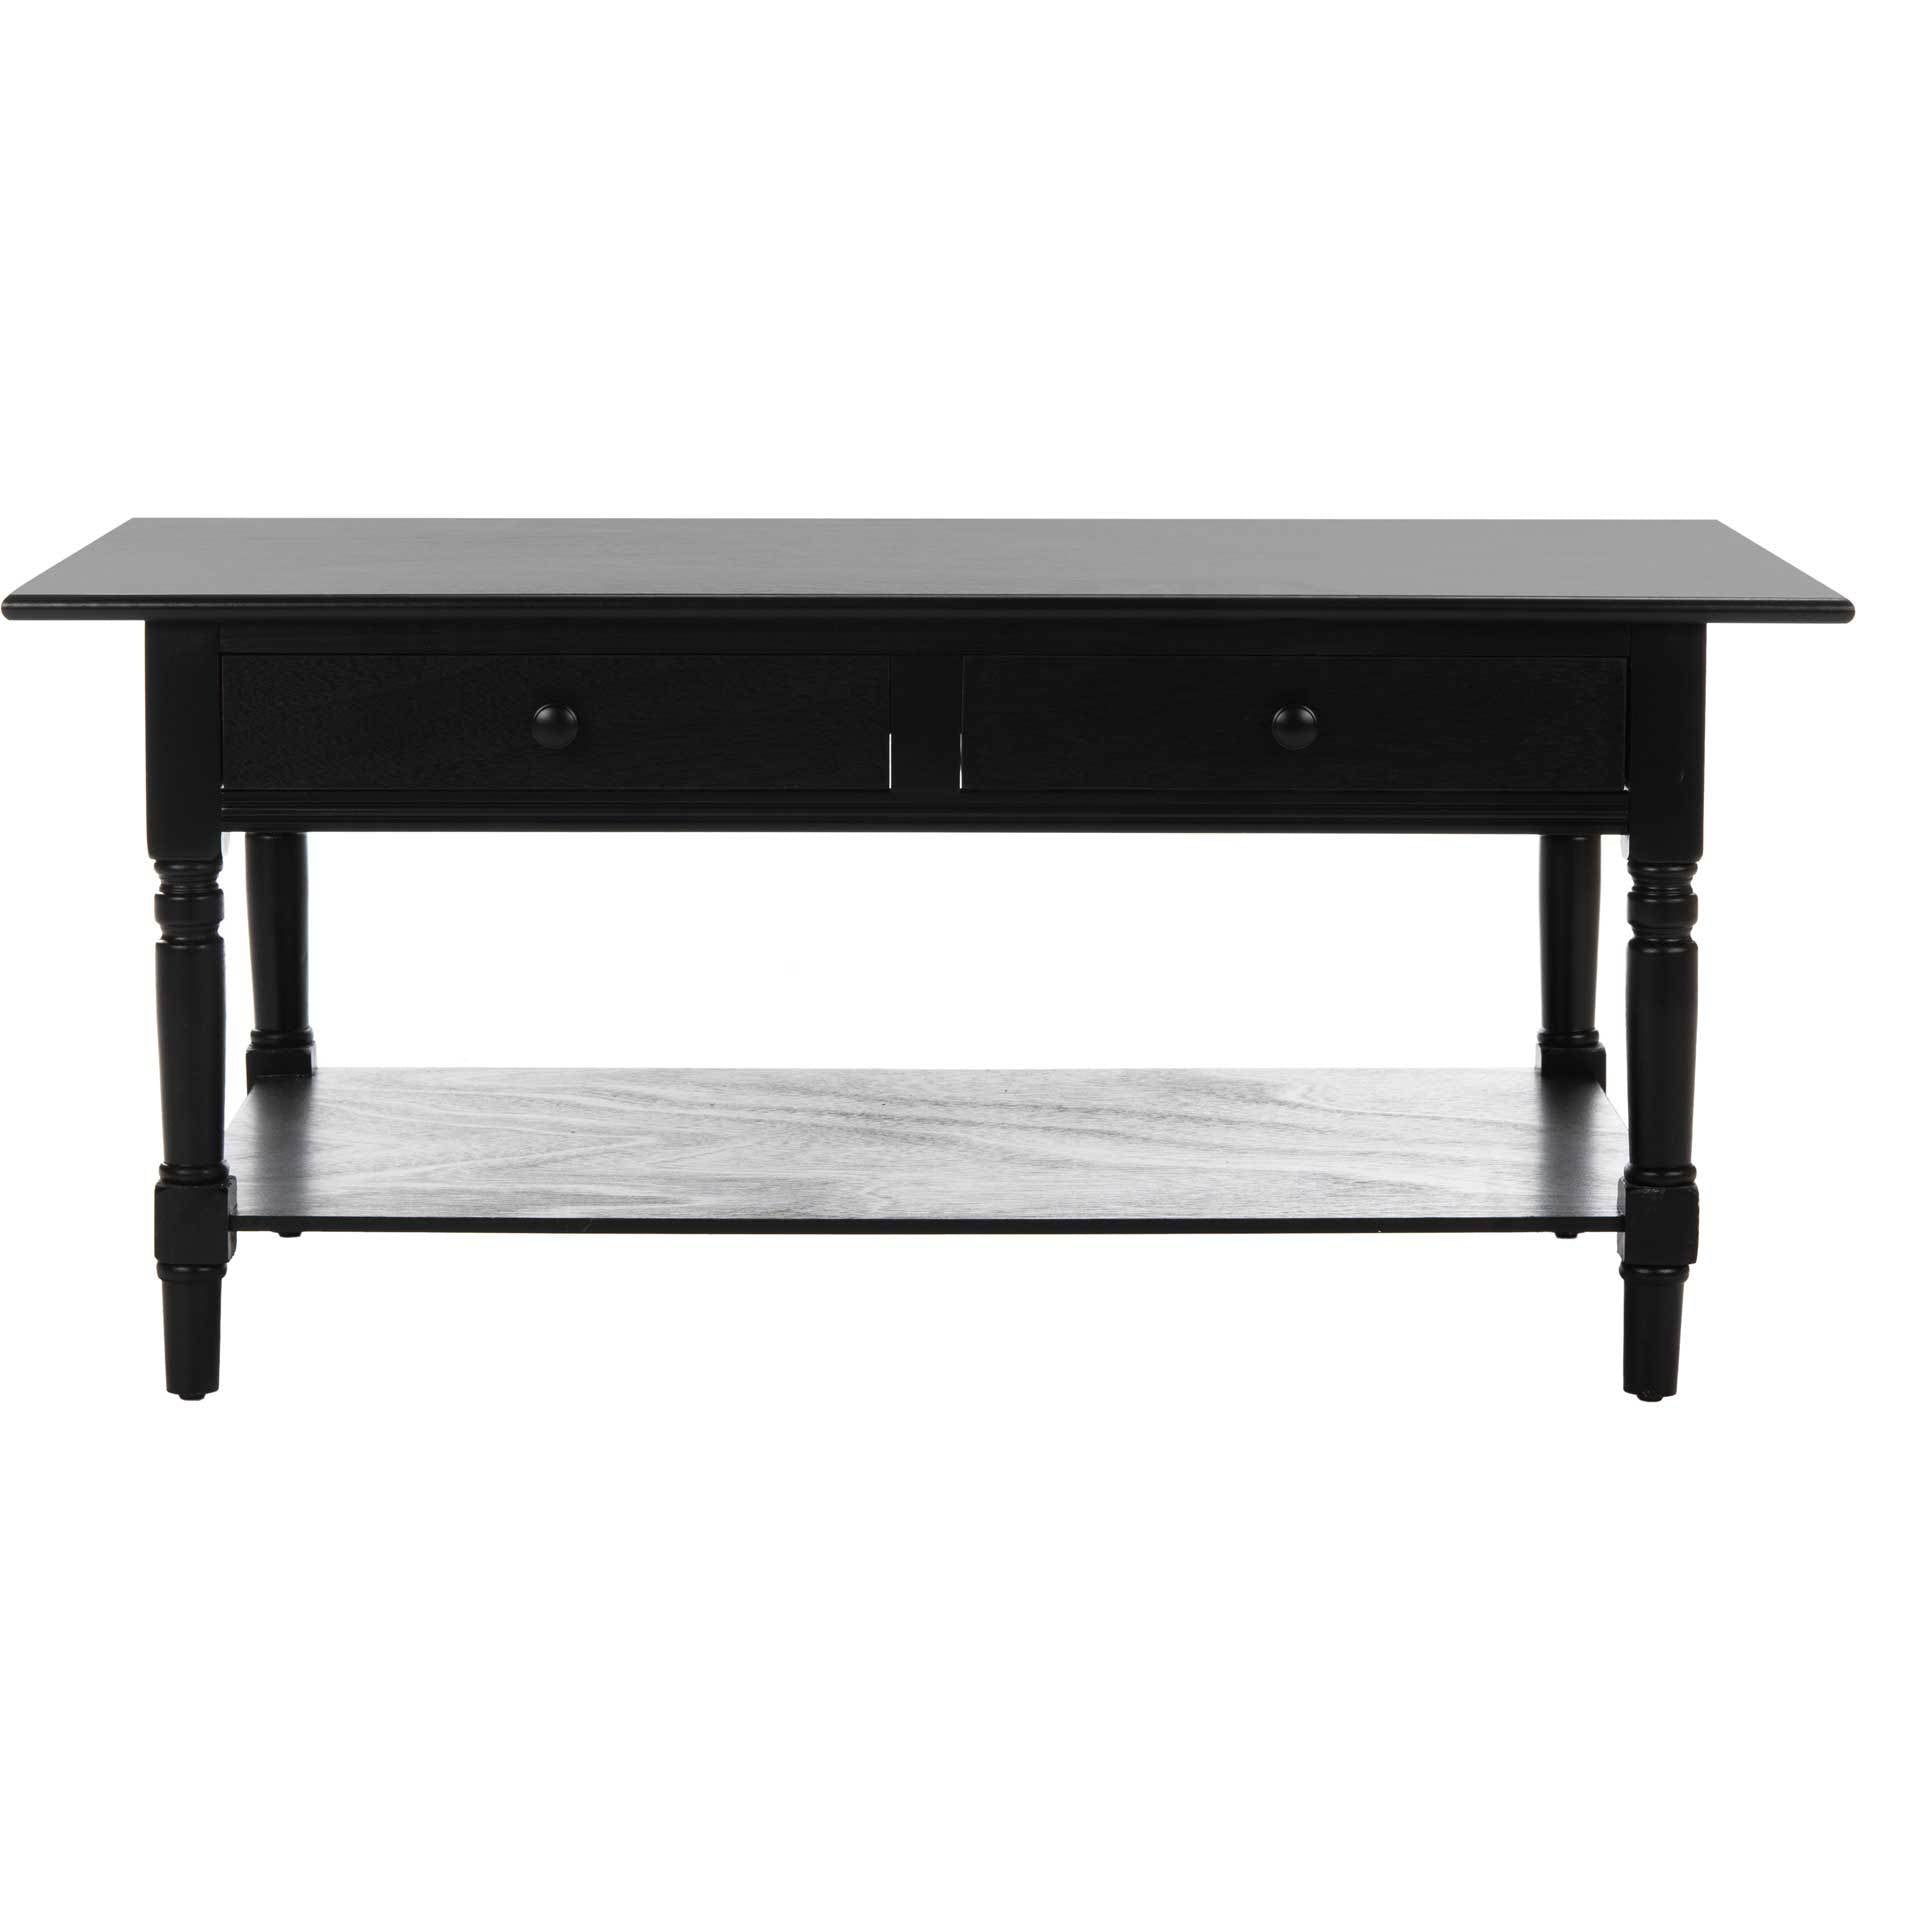 Bobby 2 Drawer Coffee Table Distressed Black